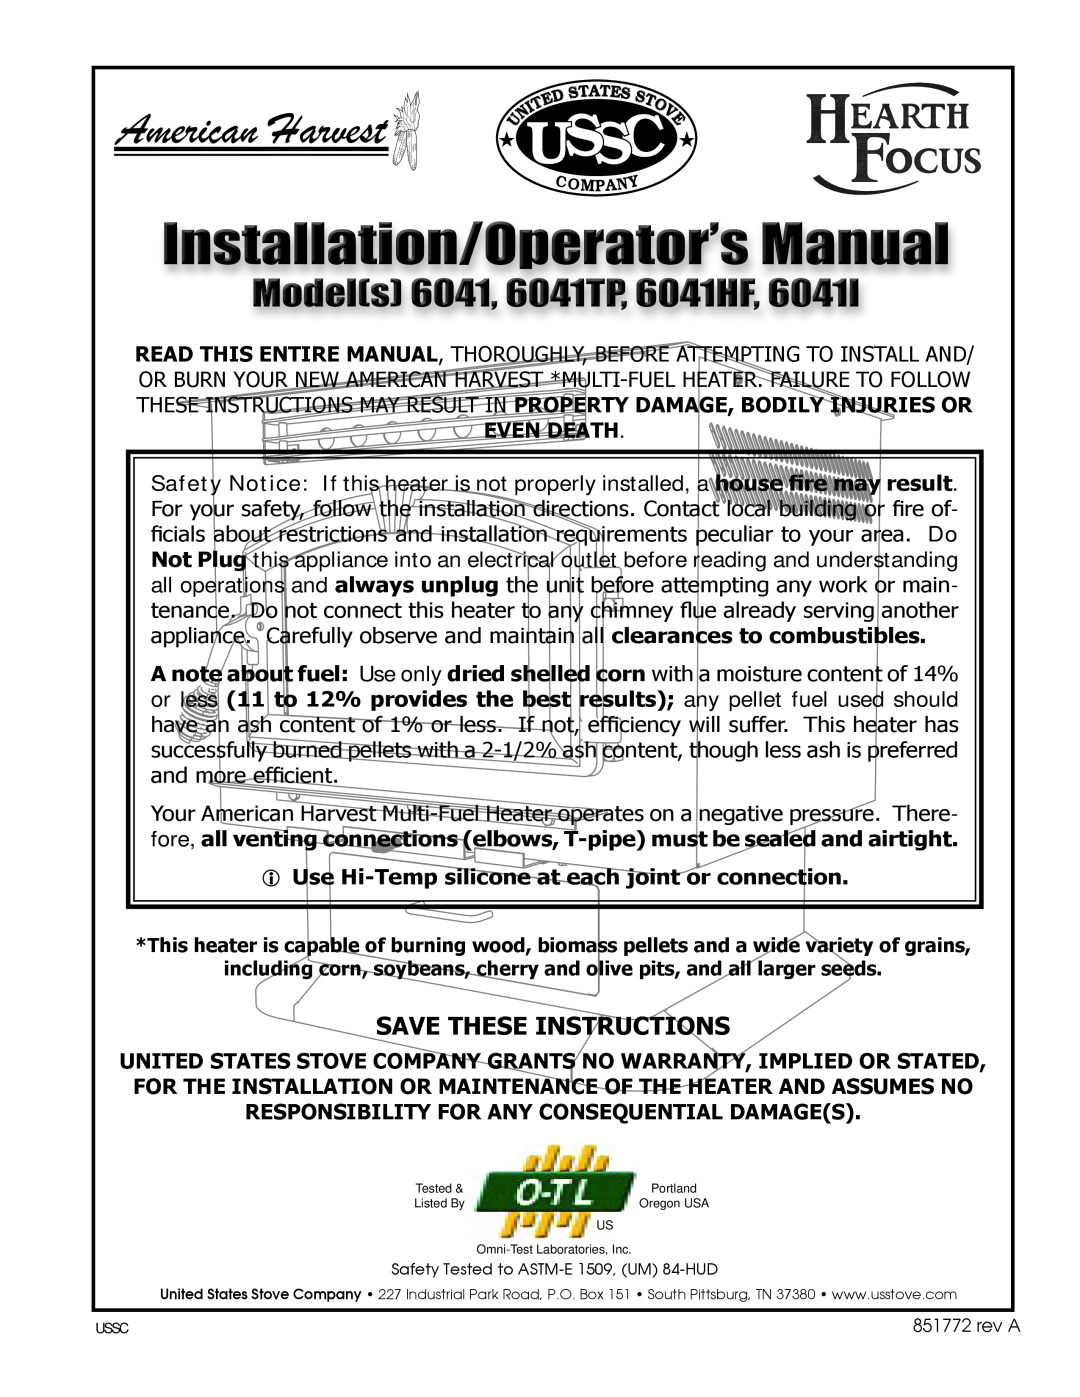 United States Stove 6041I, 6041TP, 6041HF warranty Save These Instructions, Ussc, American Harvest, Even Death 